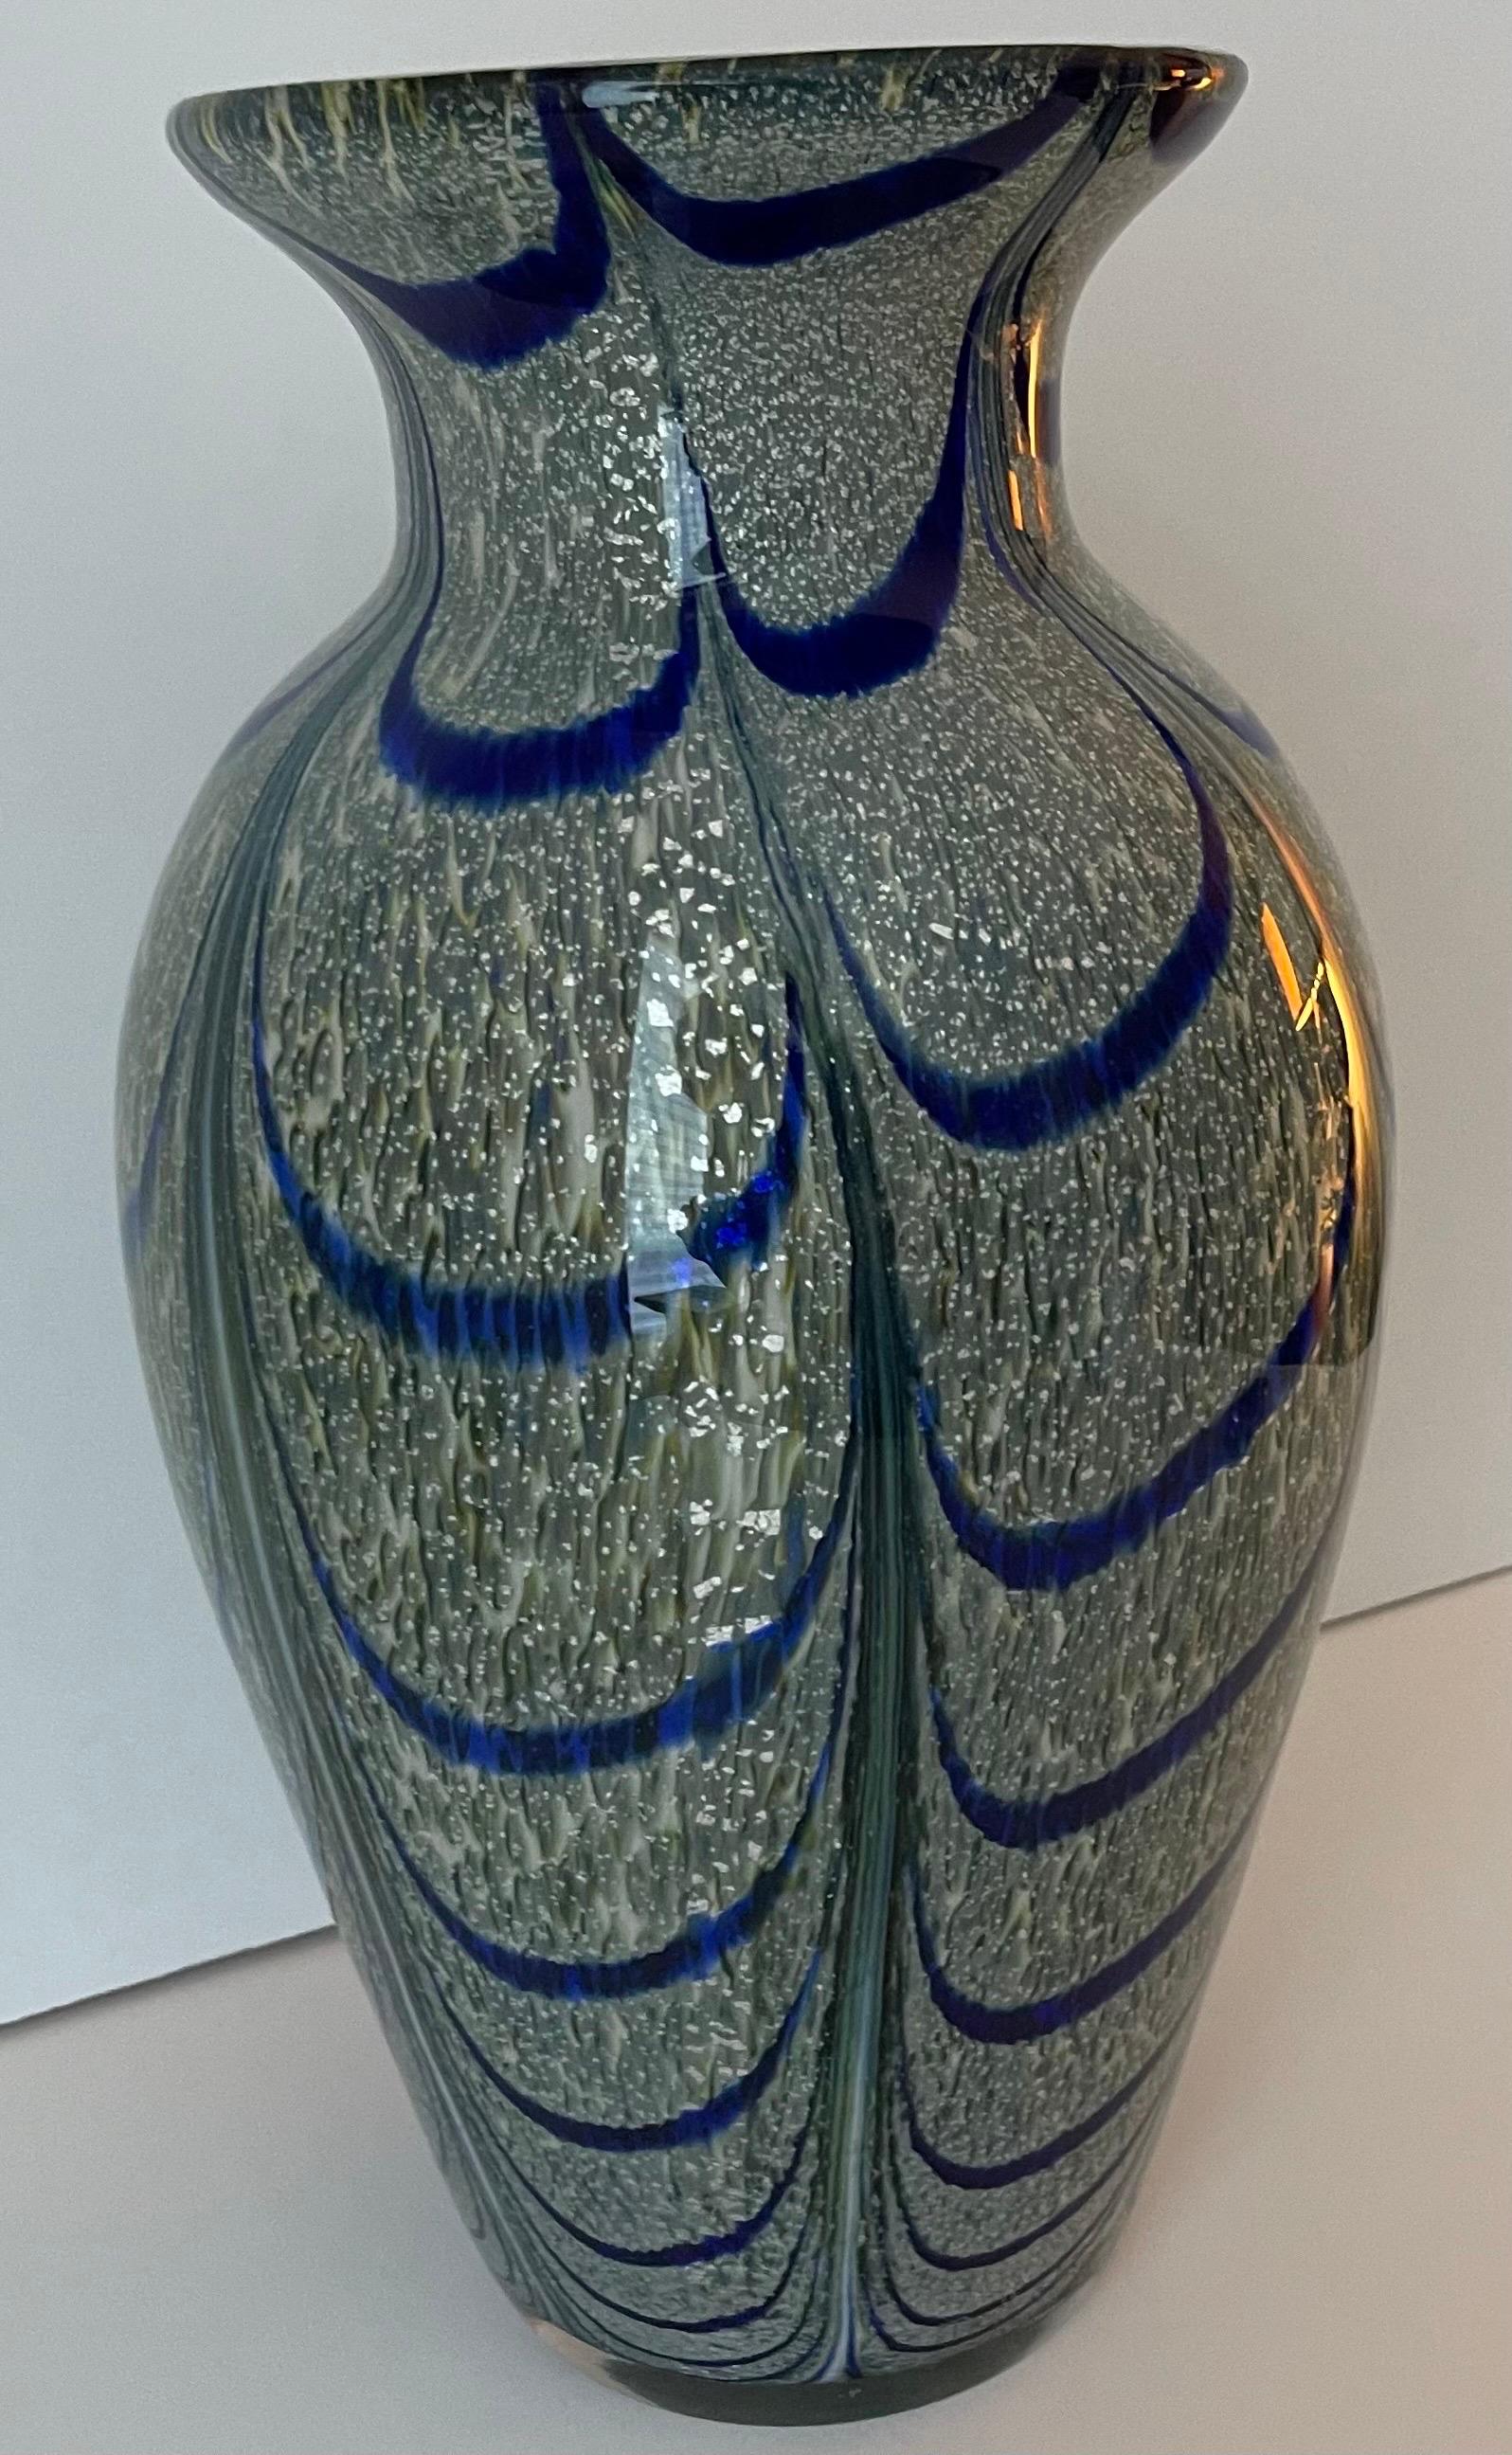 Large and substantial blown glass art vase. All over peacock swirl pattern with gold flecking throughout. No makers mark or signature.